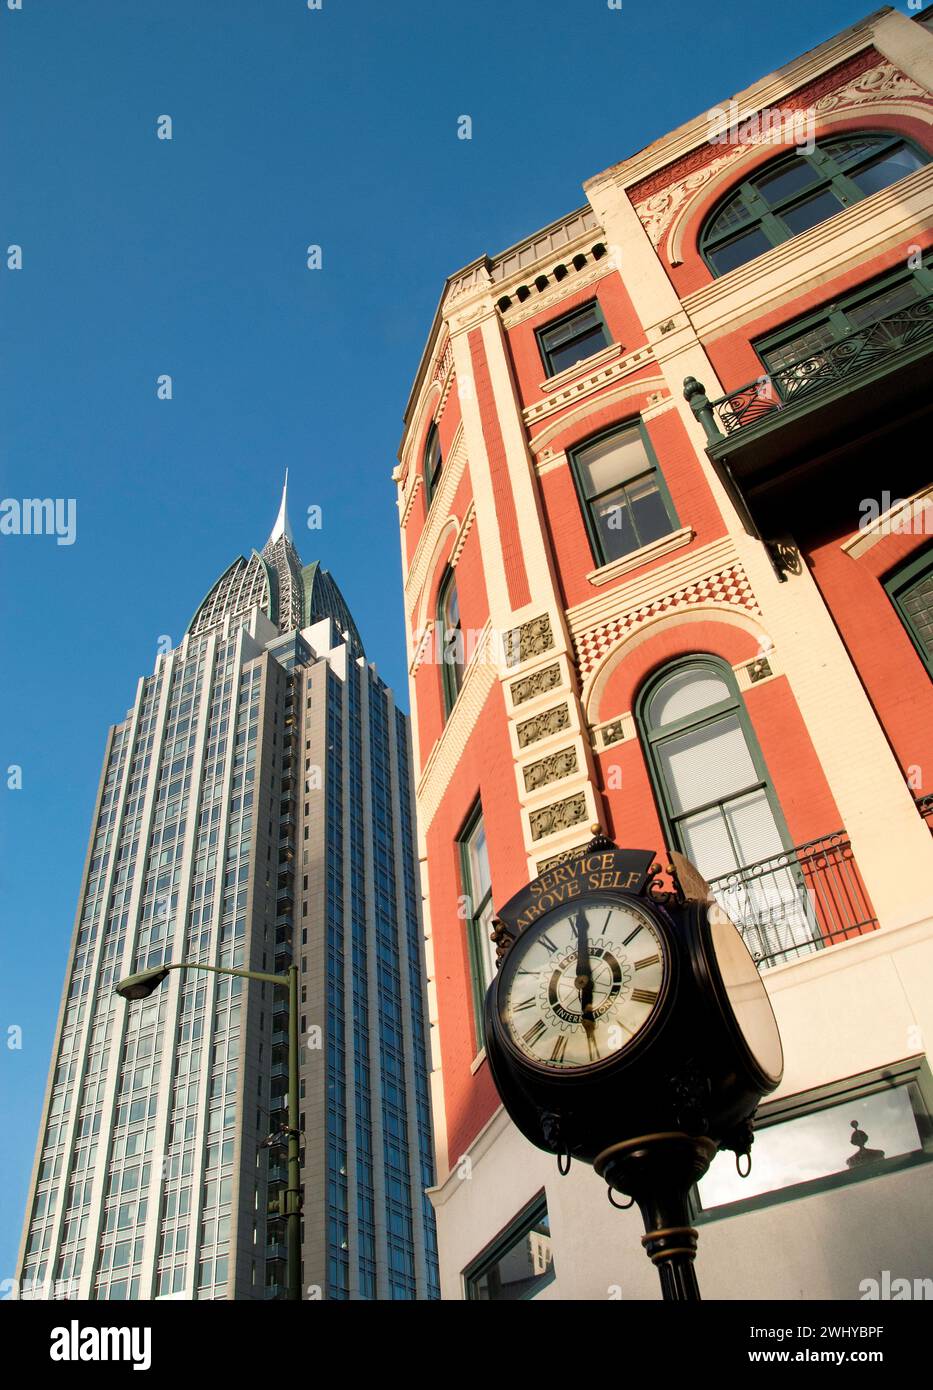 clock and building in Lower Dauphin Street Historic District and RSA Battle House Tower in downtown Mobile, Alabama - USA Stock Photo